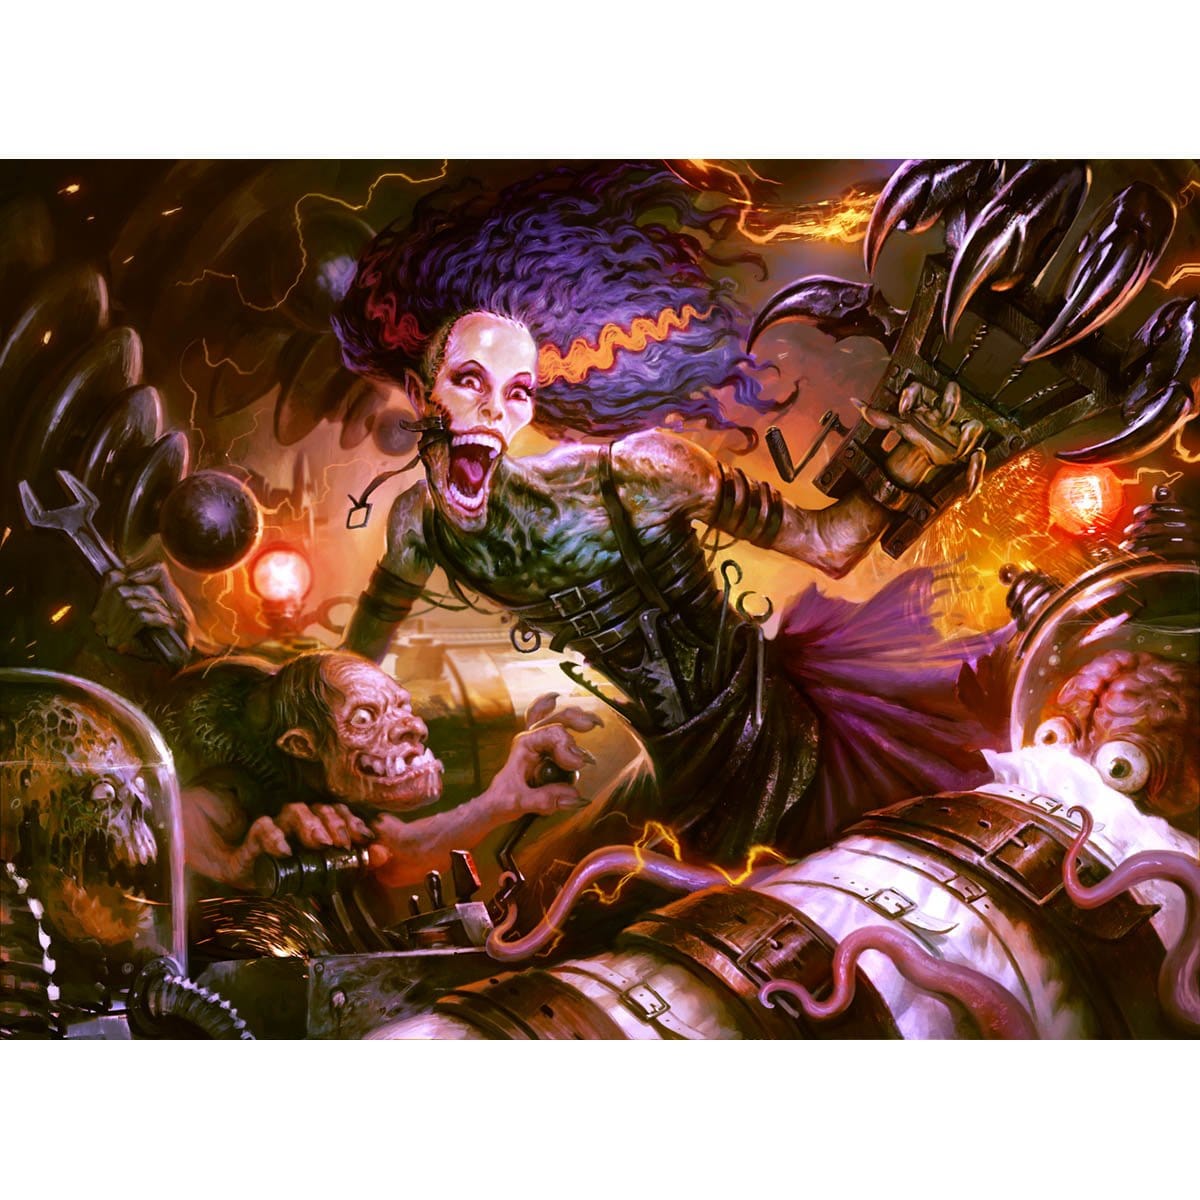 Grusilda, Monster Masher Print - Print - Original Magic Art - Accessories for Magic the Gathering and other card games